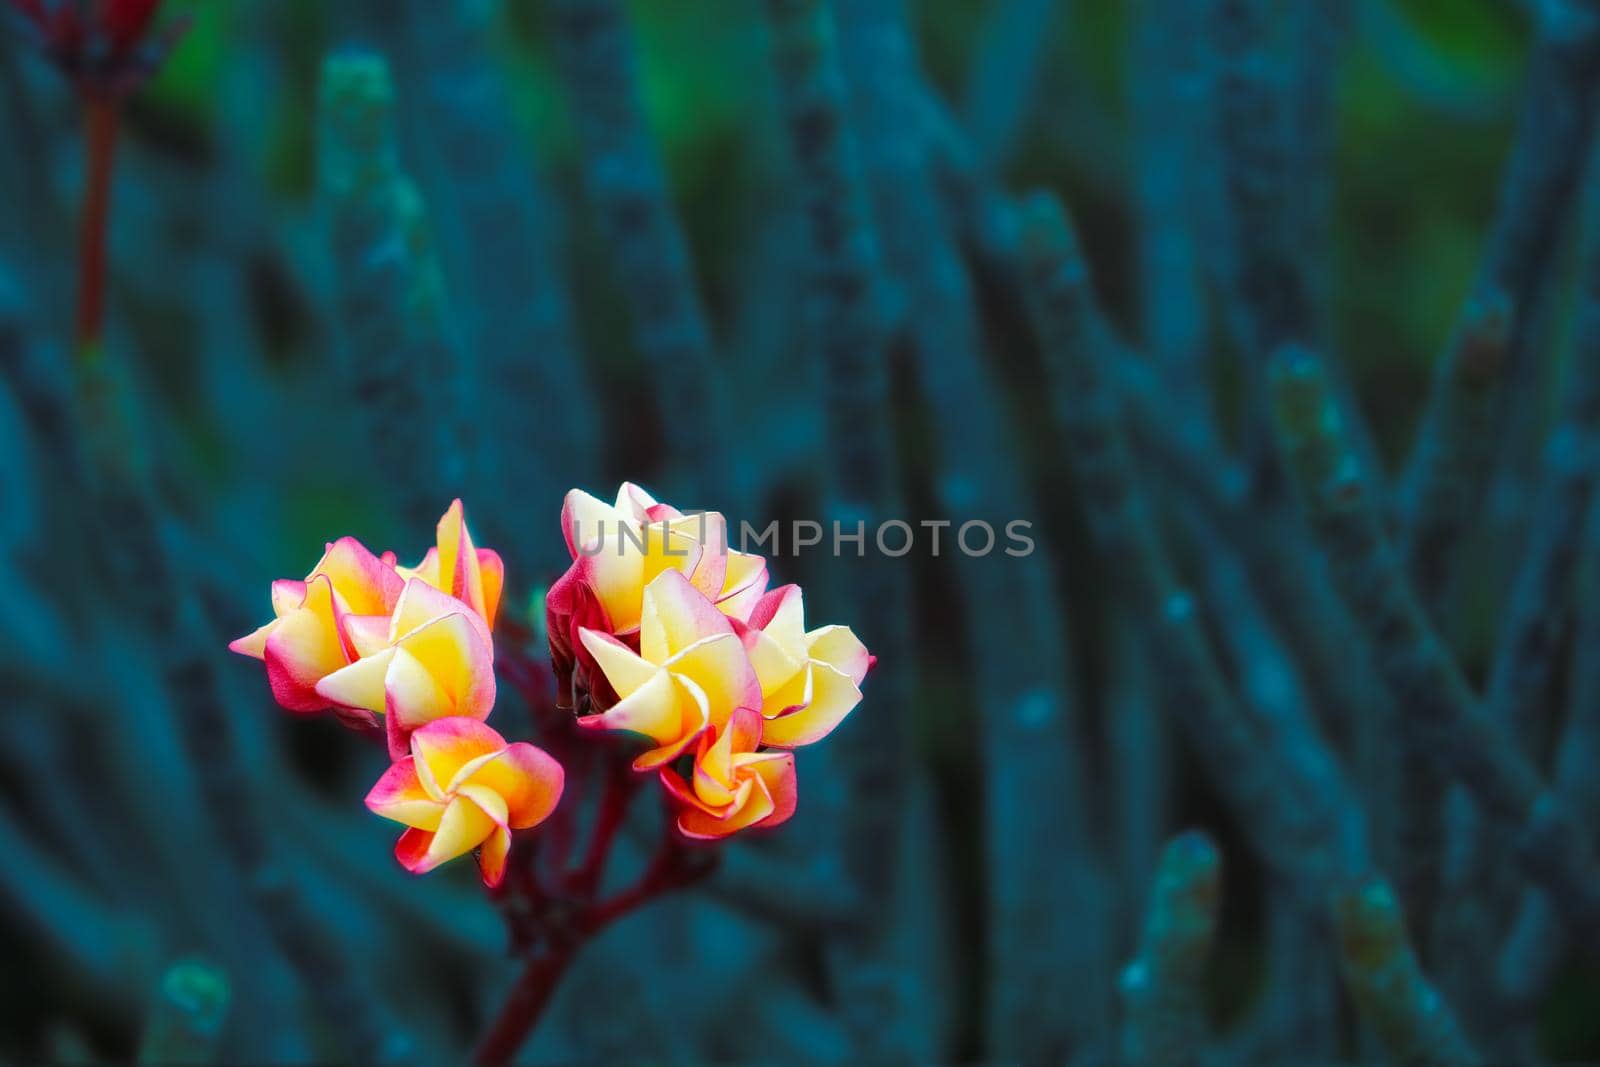 Plumeria red yellow white flower and frangipani floral, Plumeria Flower buds and green leaves background in the garden